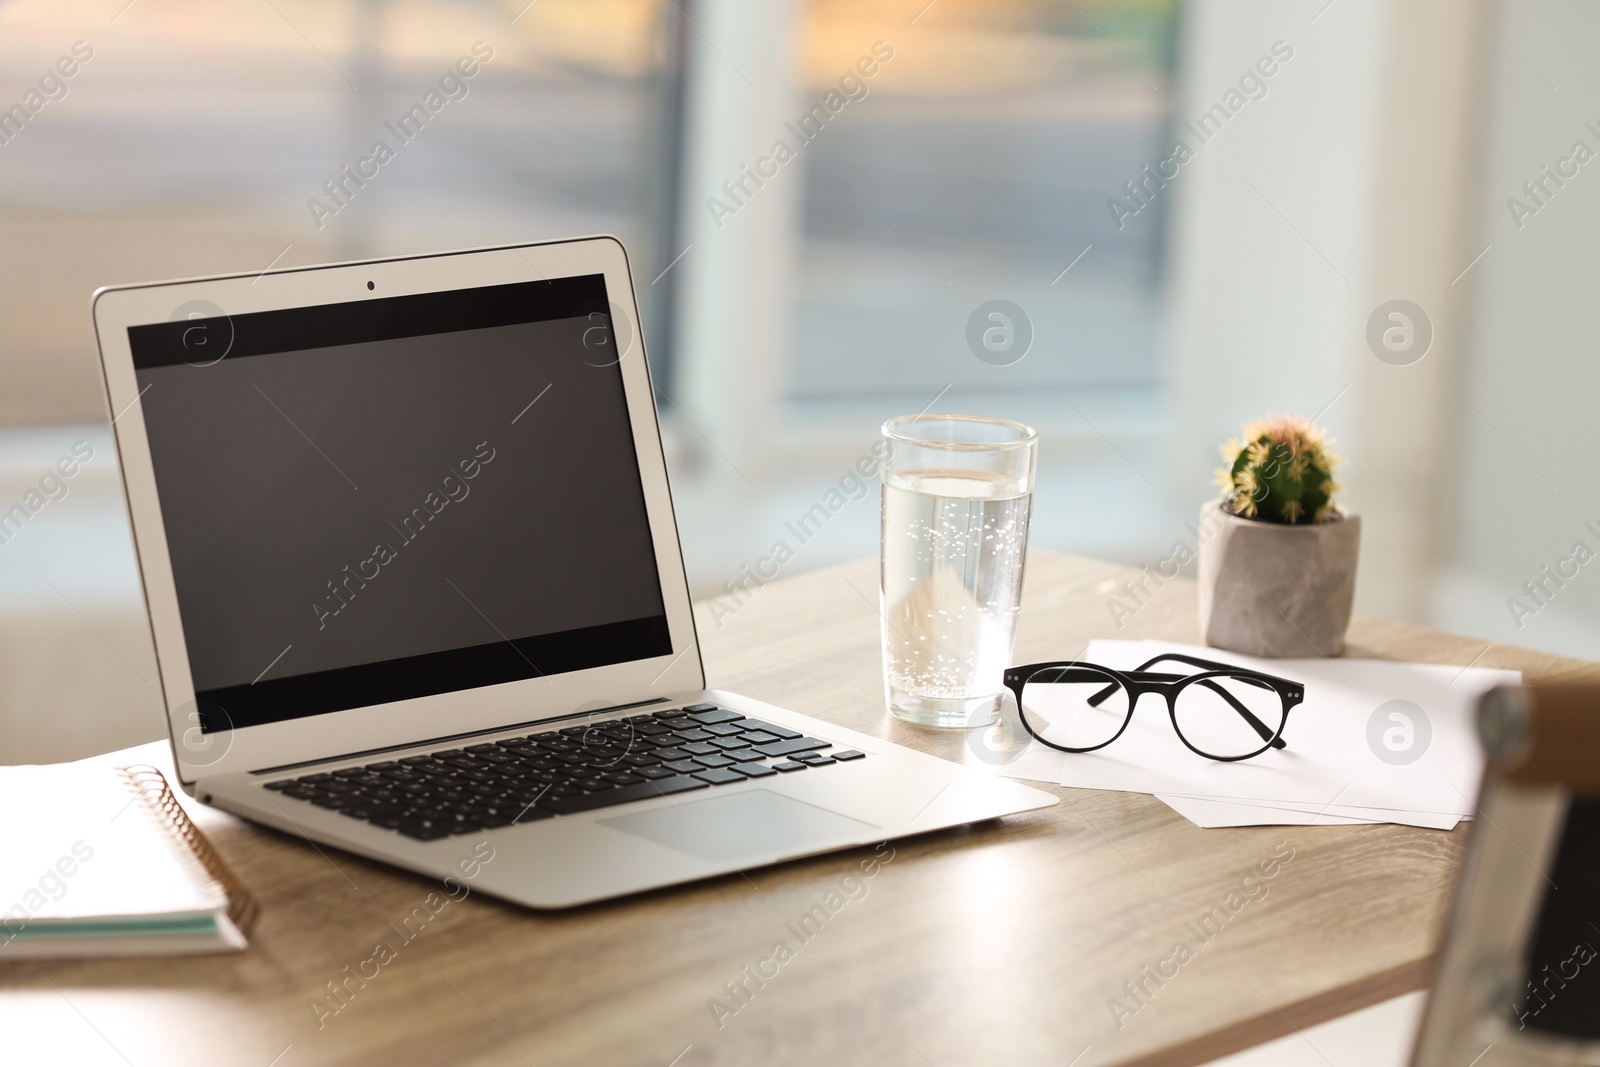 Photo of Modern laptop and glass of water on table in office